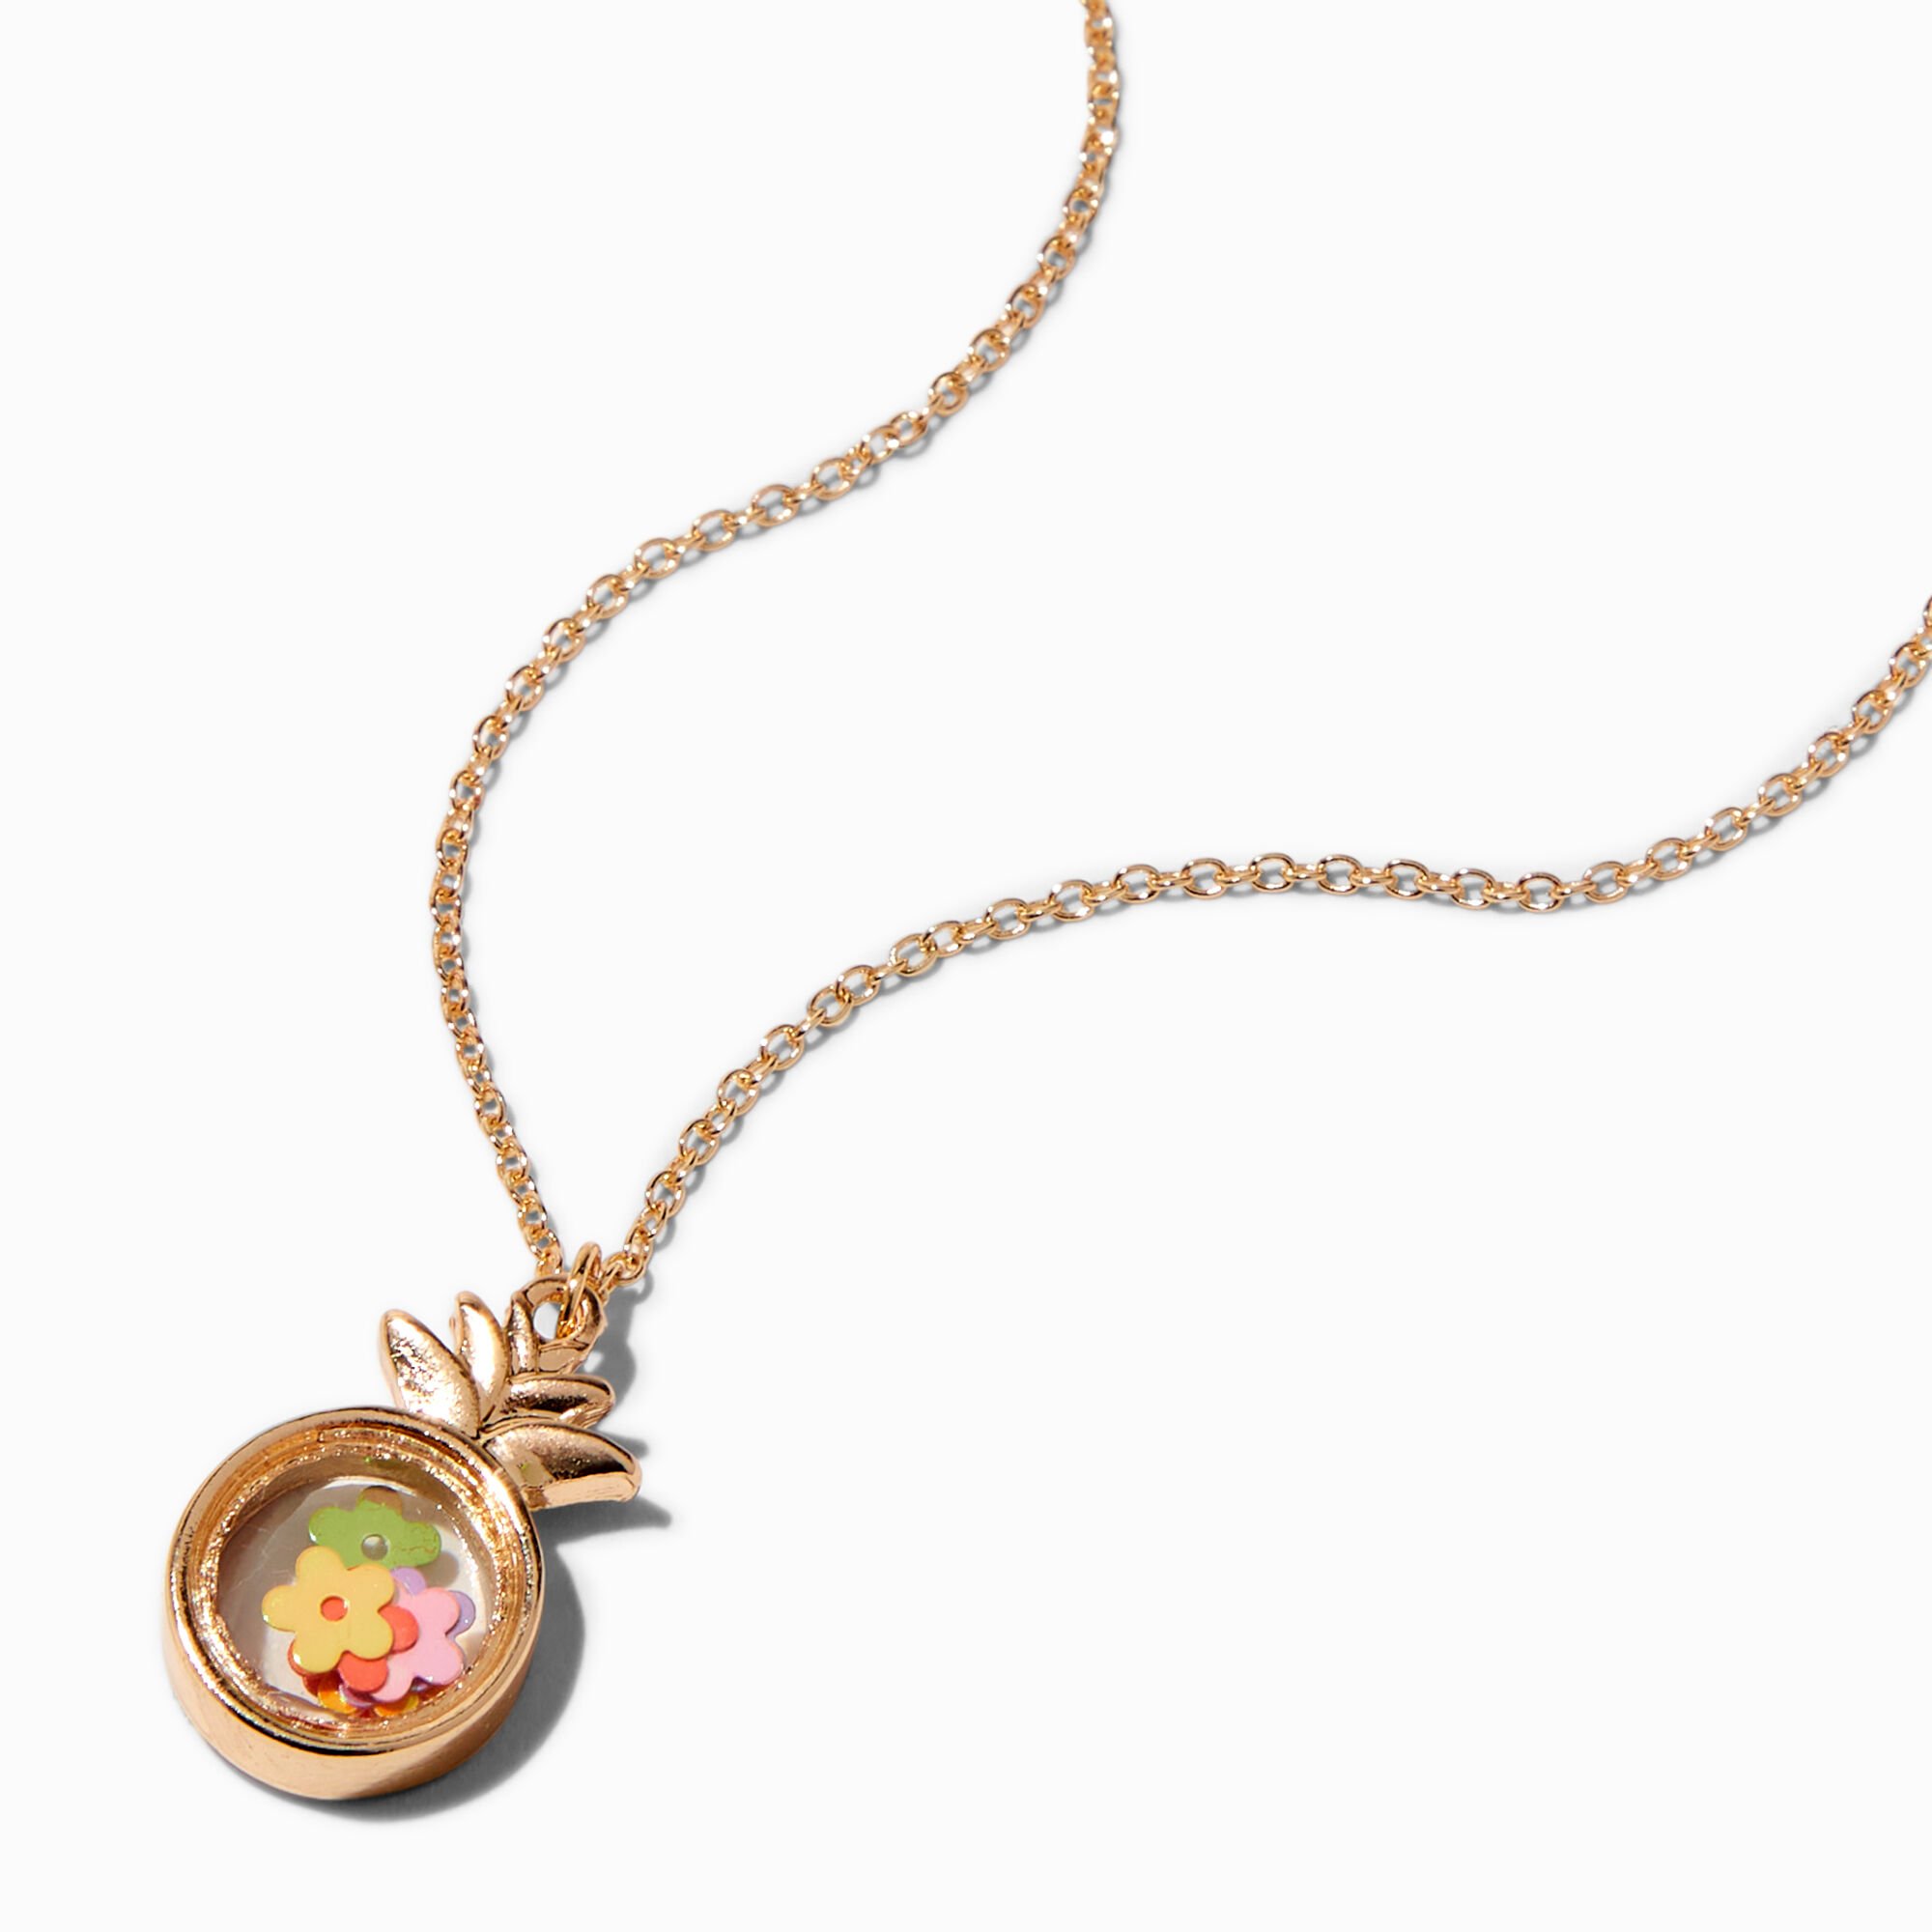 View Claires Tone Pineapple Shaker Pendant Necklace Gold information